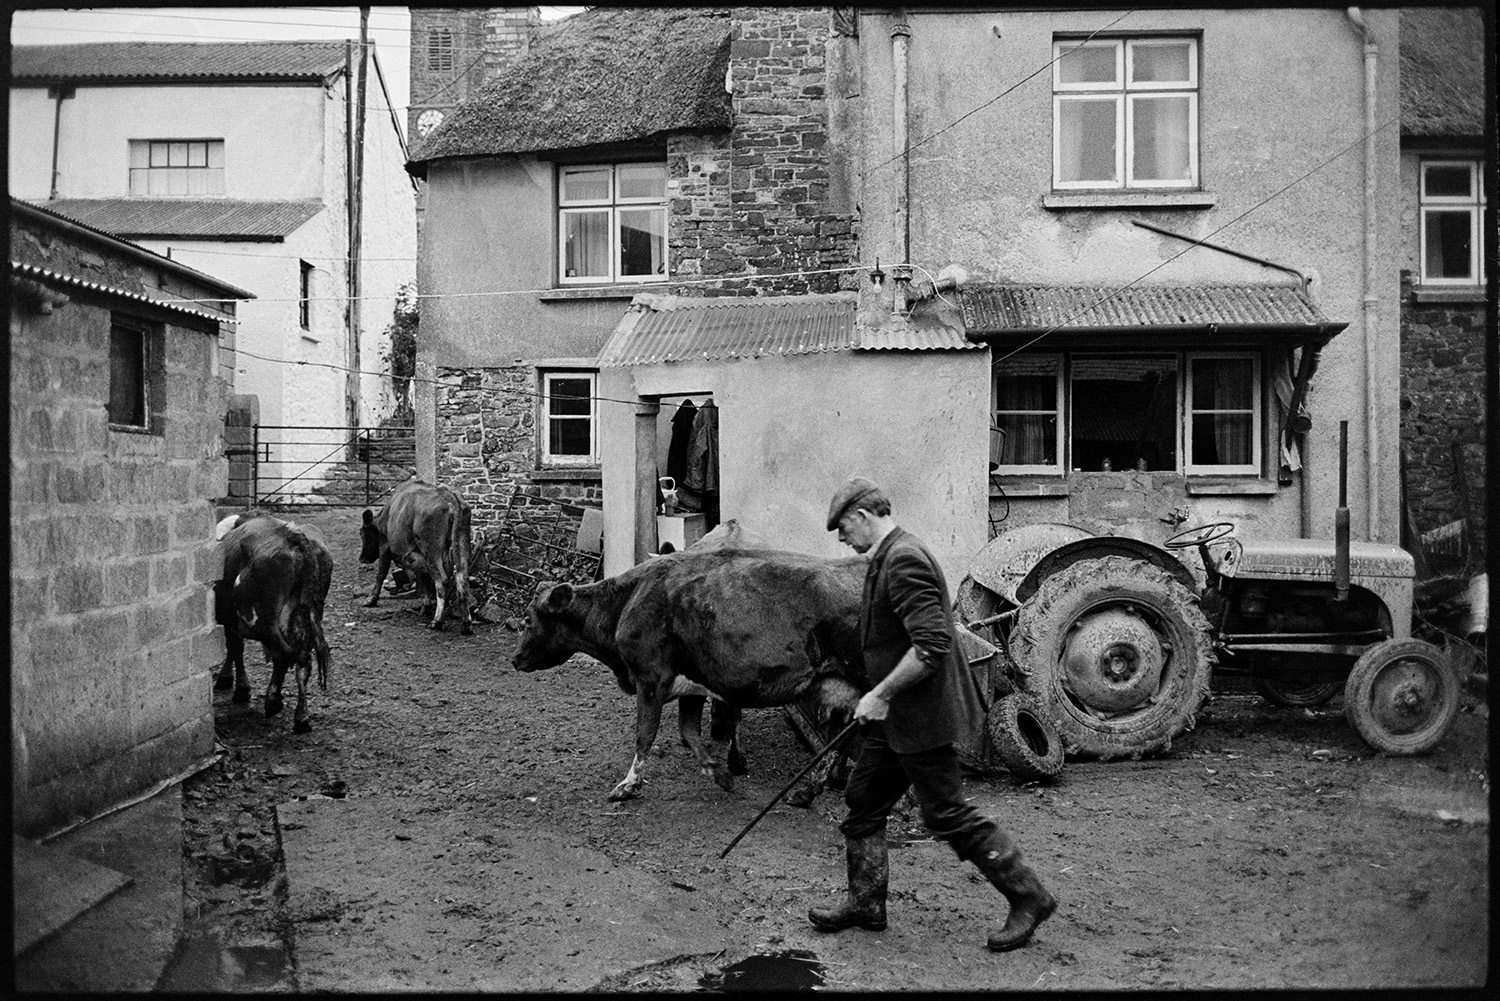 Farmer putting horned cows in barn to be milked. 
[Jim Woolacott herding tree cows through the farmyard at Verdun, Atherington to go to be milked. A tractor is parked outside the farmhouse.]